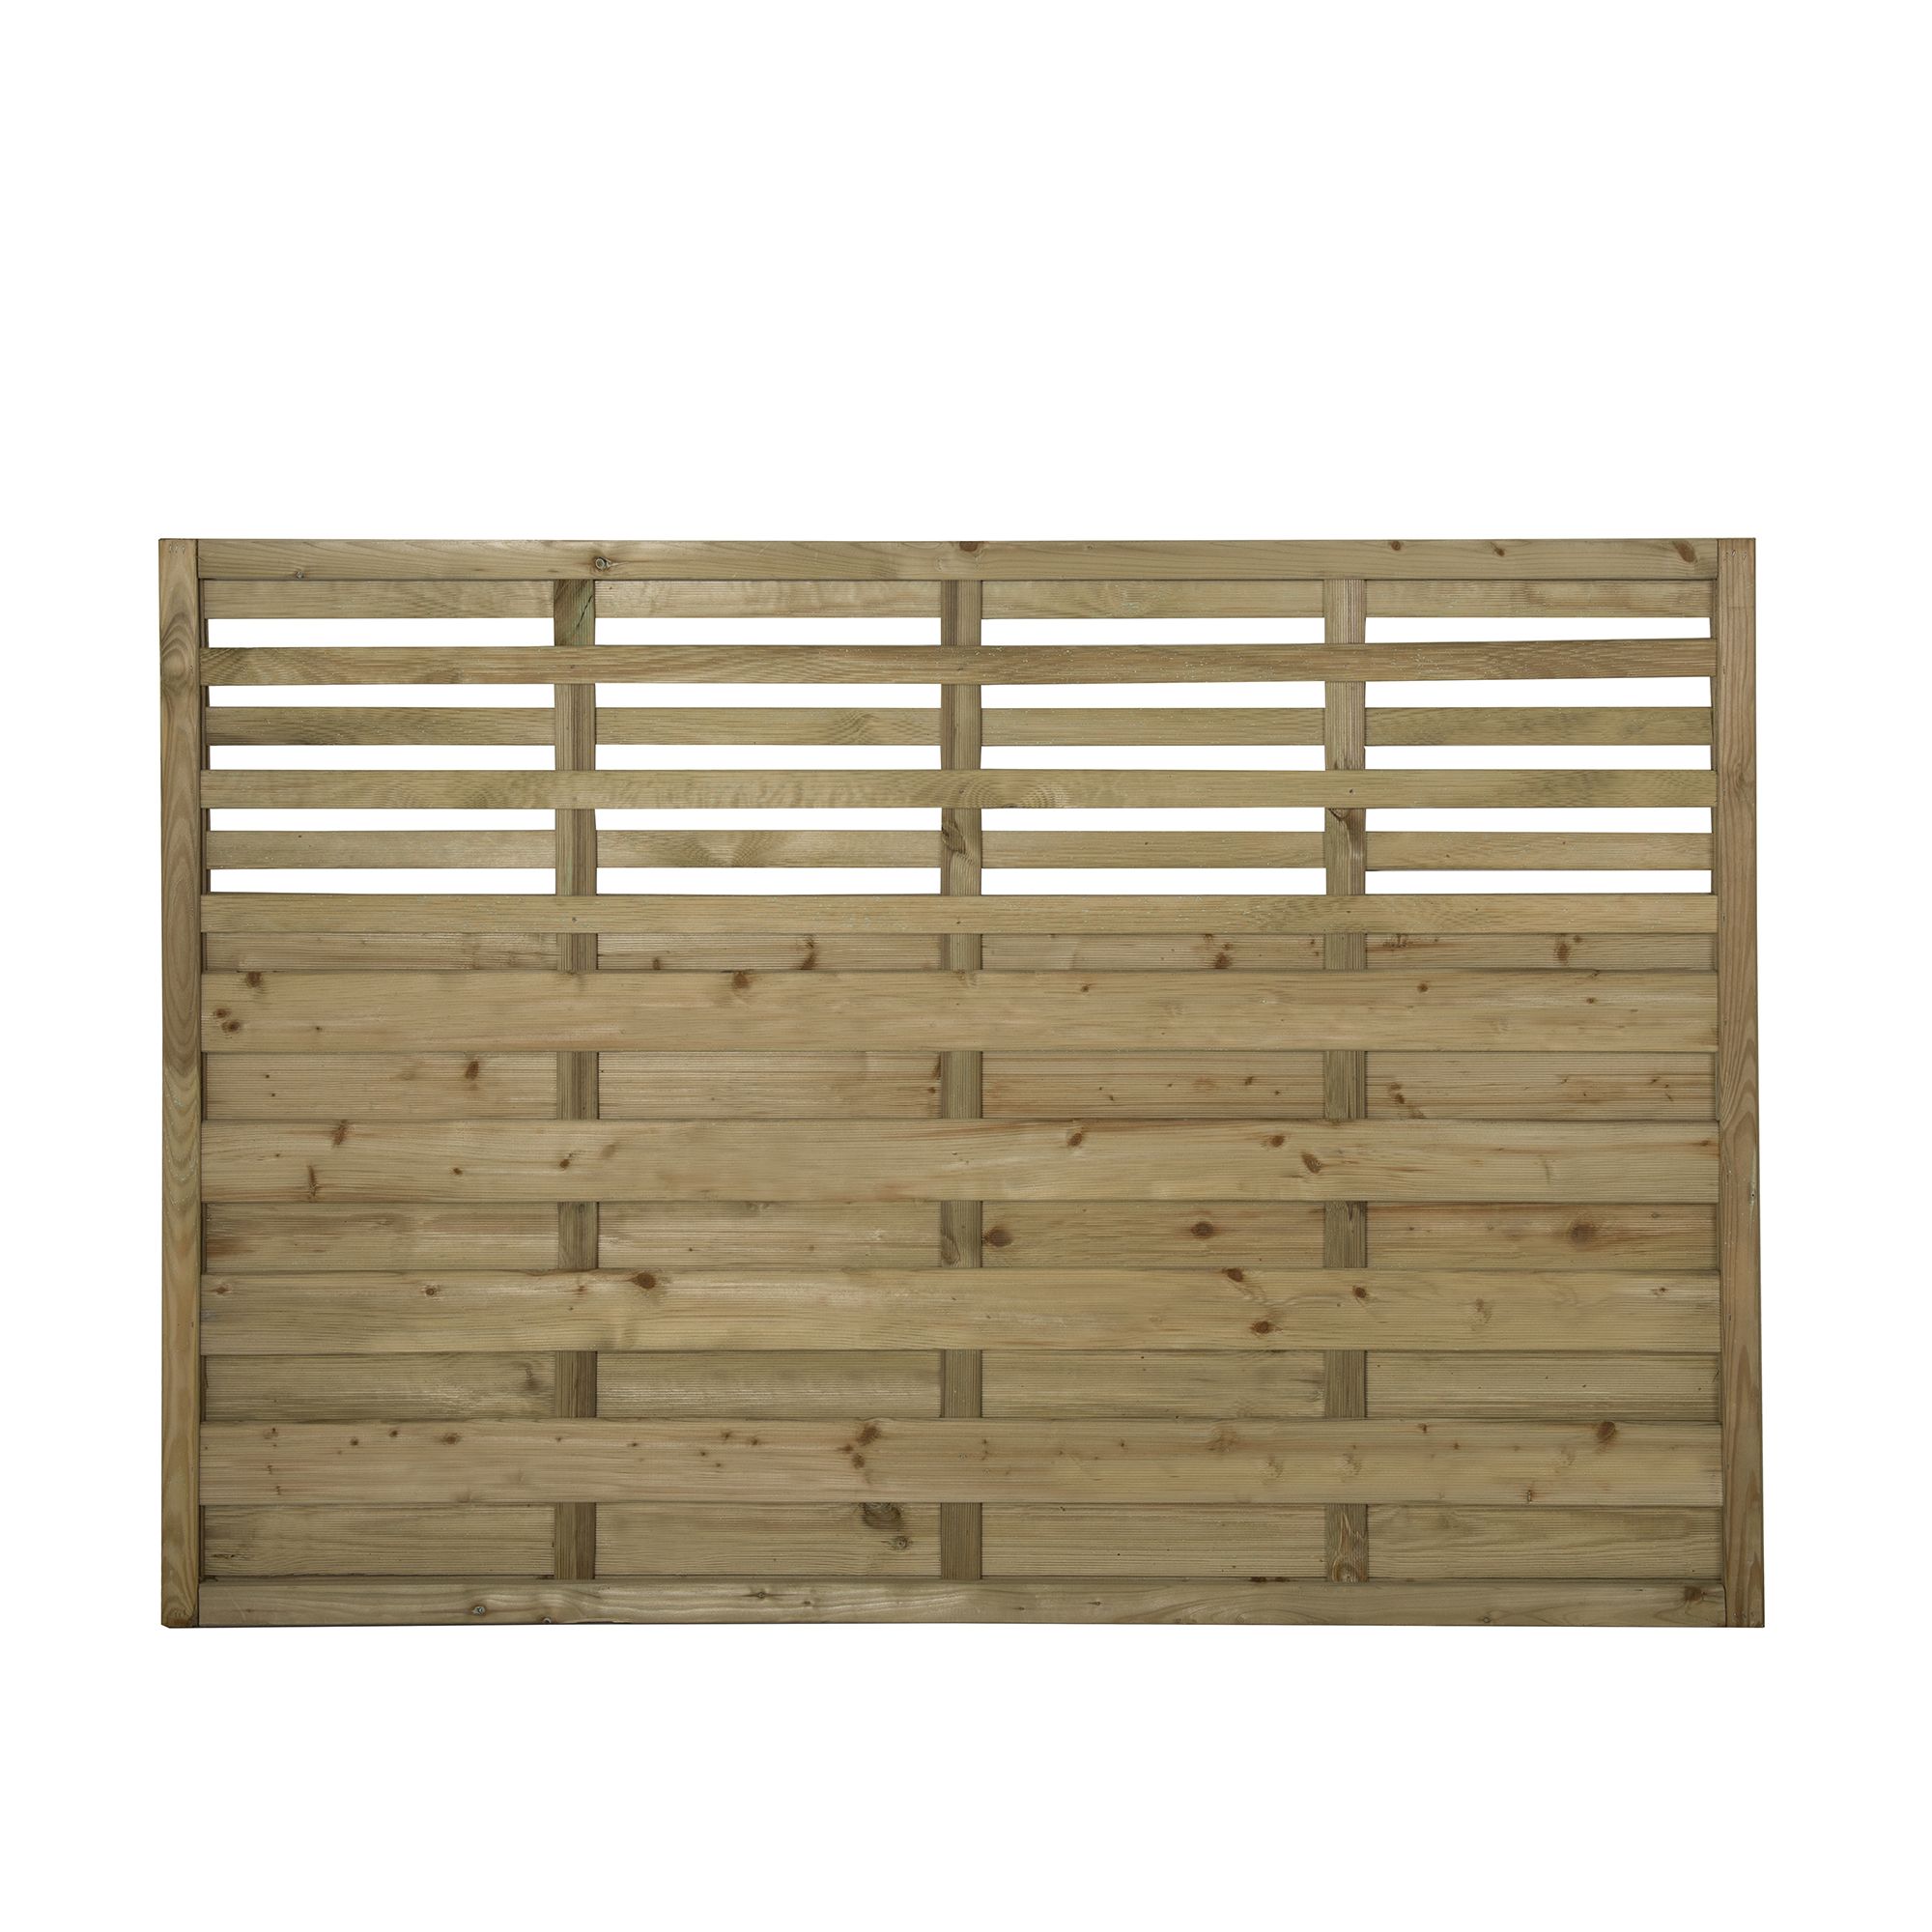 Forest Garden Contemporary Slatted Pressure treated 4ft Wooden Fence panel (W)1.8m (H)1.2m, Pack of 3